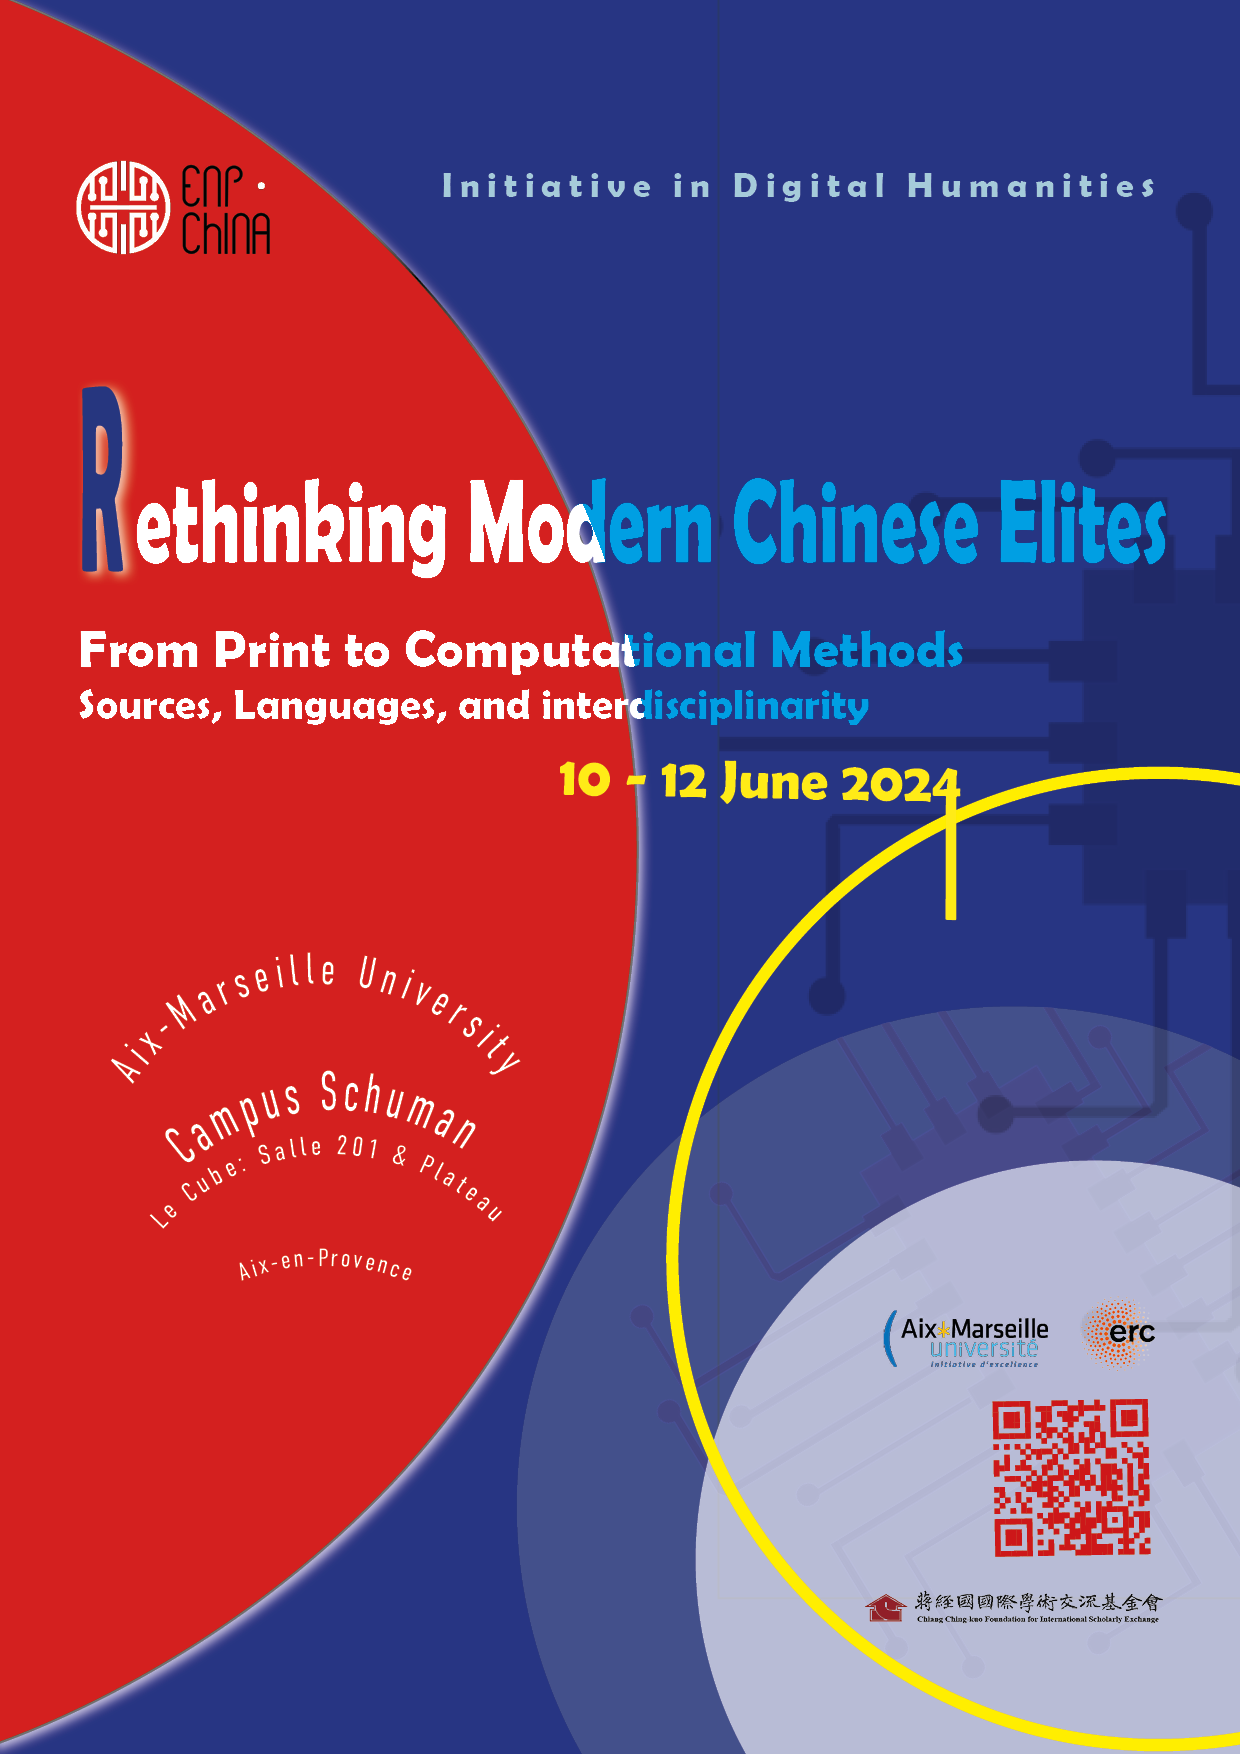 Lena Henningsen to Present at the Rethinking Modern Chinese Elites Conference in Aix-Marseille on 10-12 June